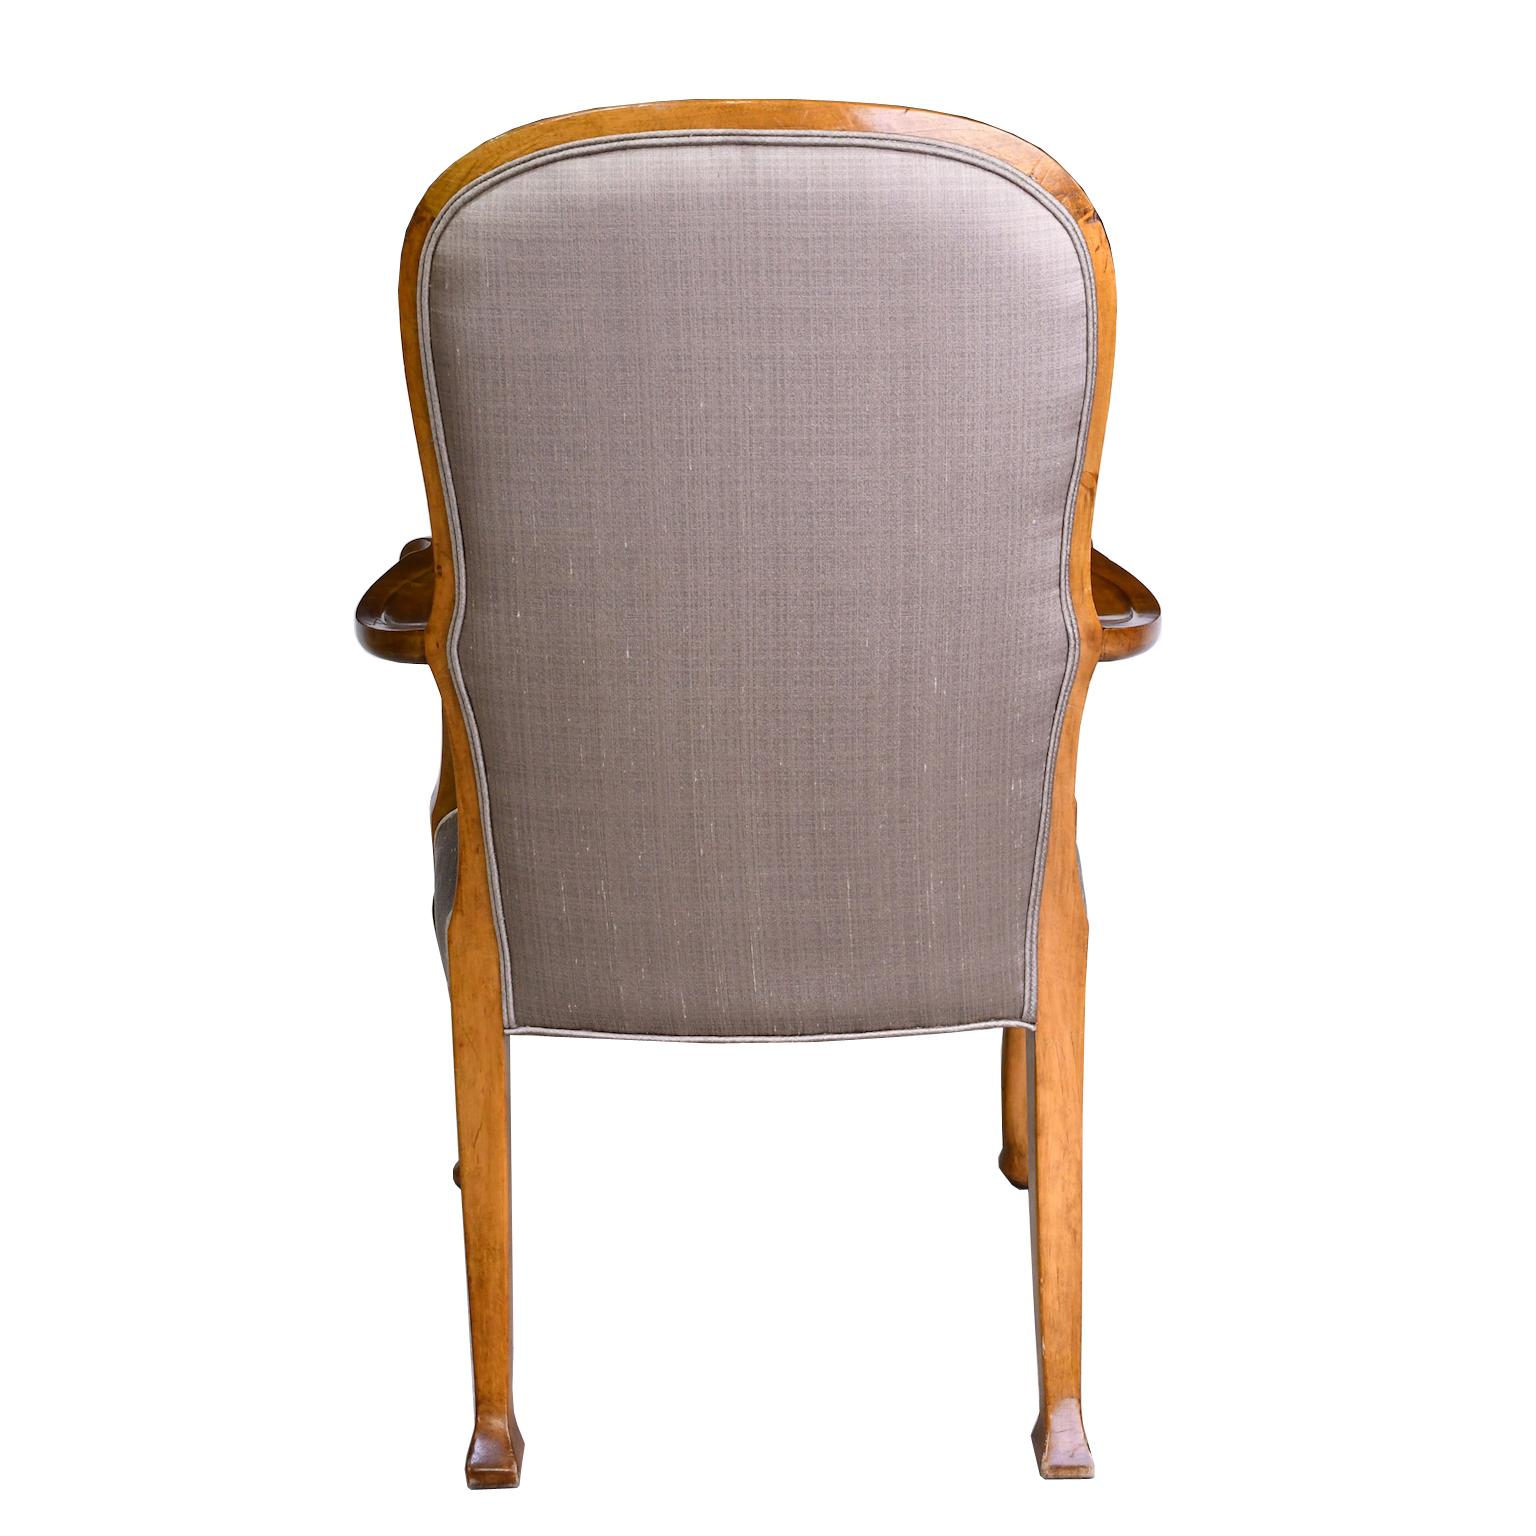 Set of 12 Dining Chairs in Birch with Upholstery, Nordiska Companiet circa 1930 8